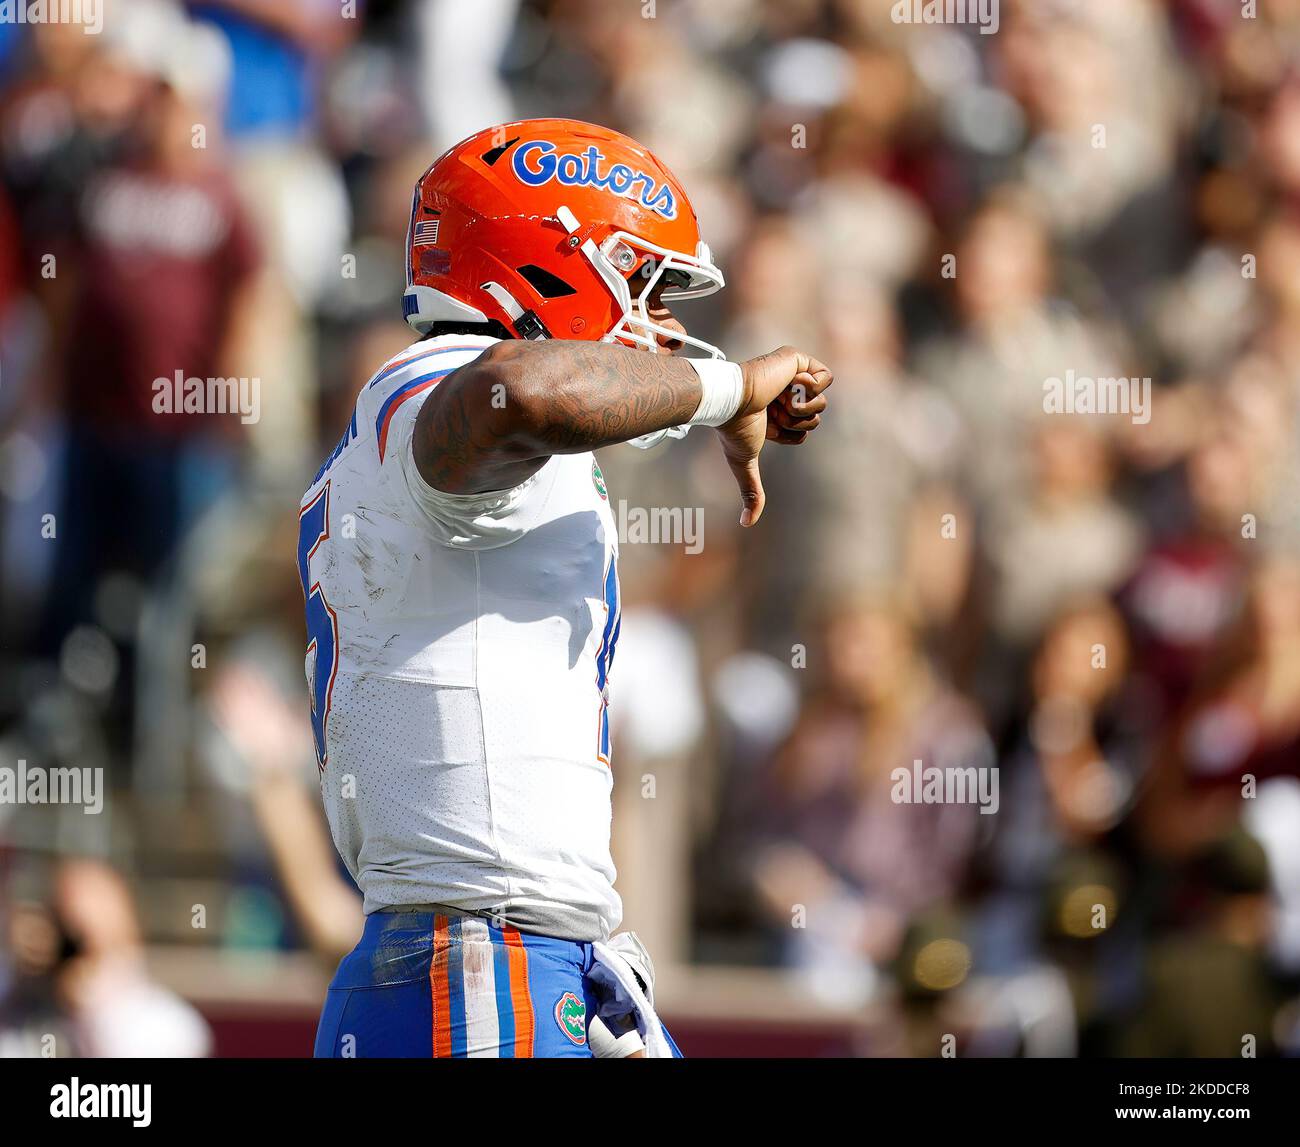 November 5, 2022: Florida quarterback Anthony Richardson (15) gestures with a thumbs down toward the home fans after scoring on a 10-yard touchdown carry during an NCAA college football game between Texas A&M and Florida on Nov. 5, 2022 in College Station. Florida won 41-24. (Credit Image: © Scott Coleman/ZUMA Press Wire) Stock Photo